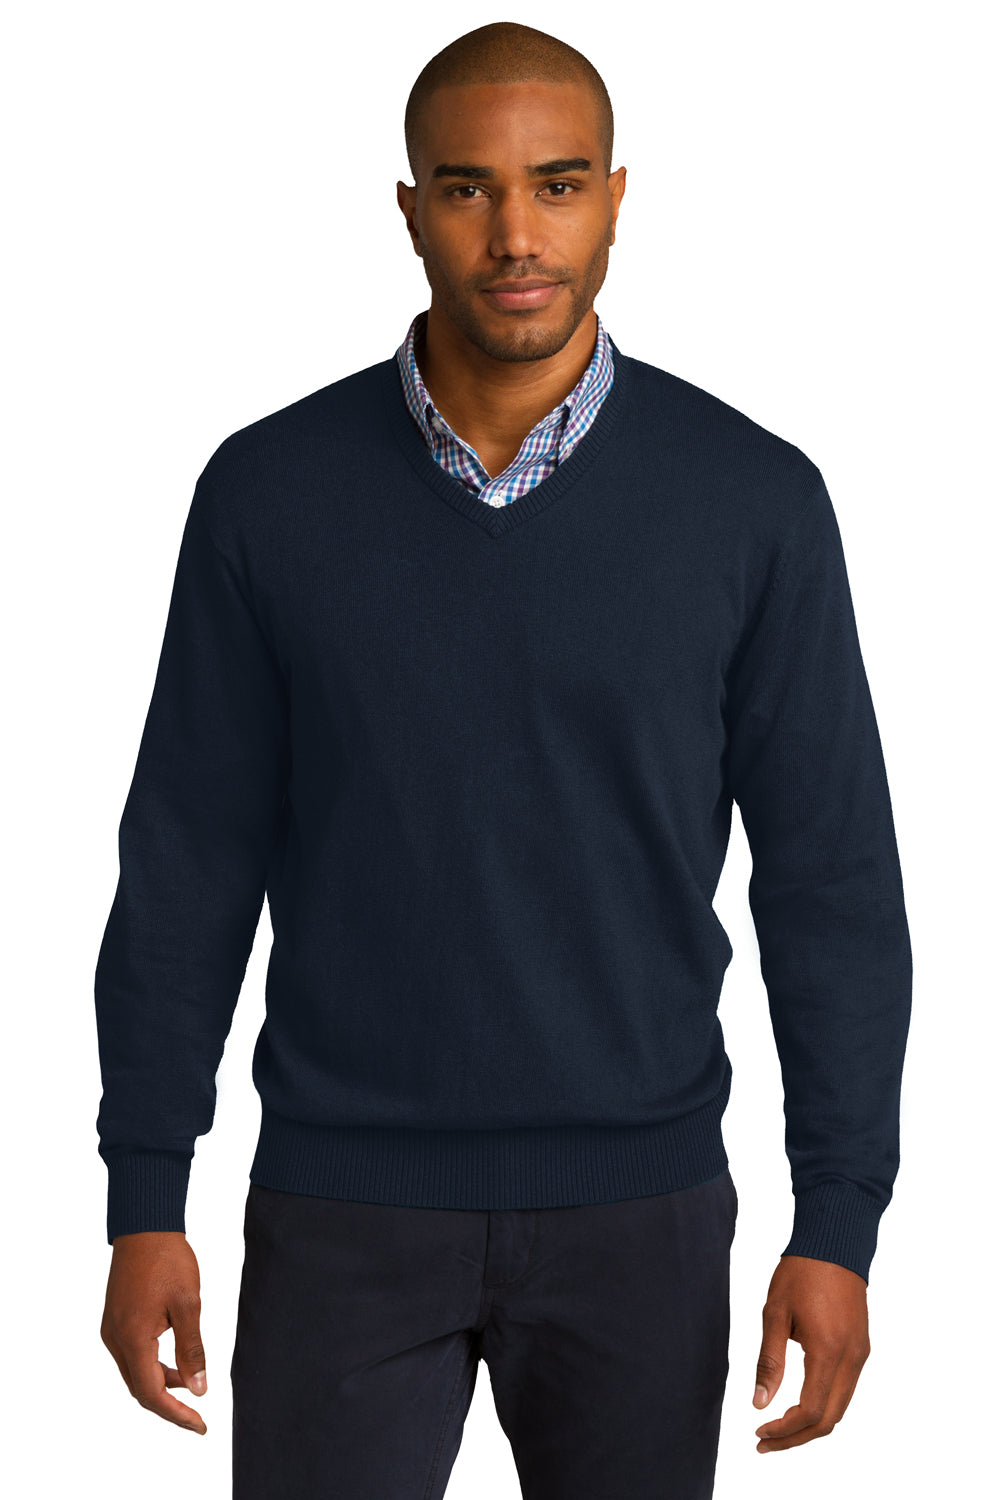 Port Authority SW285 Mens Long Sleeve V-Neck Sweater Navy Blue Front